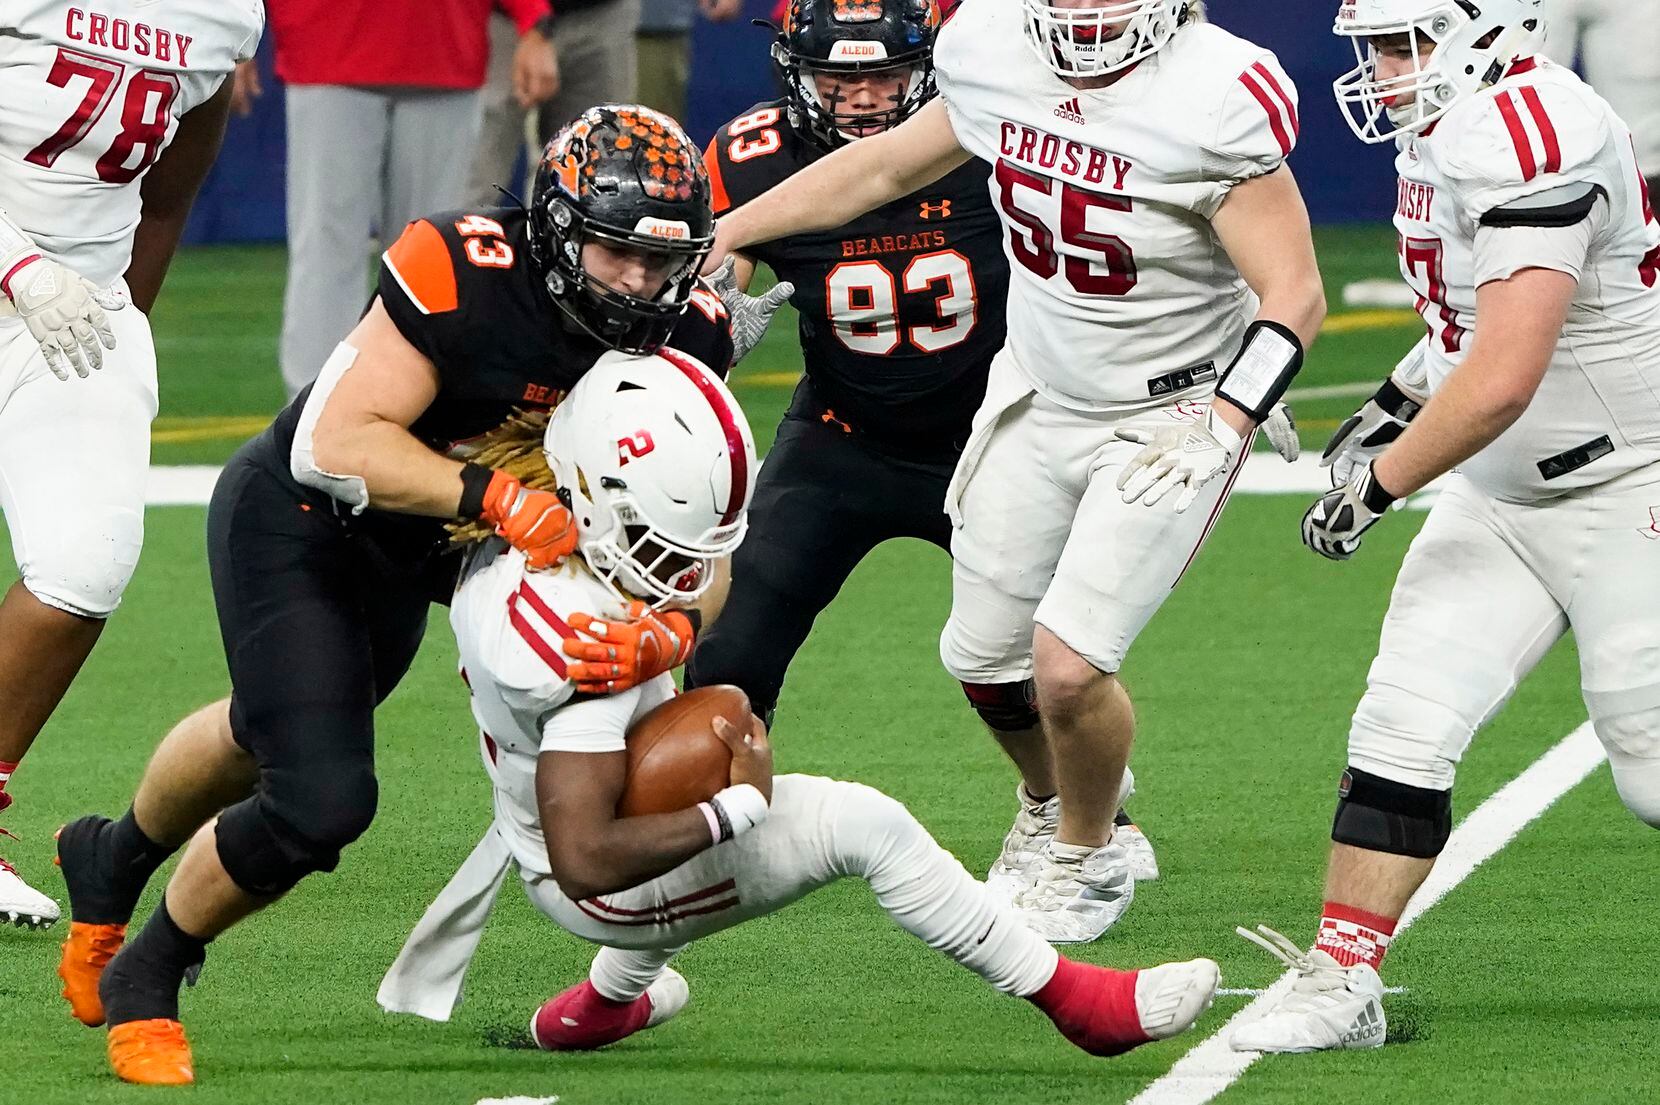 Crosby Deniquez Dunn (2) is sacked by Aledo defensive lineman Kyle Thompson (43) during the first half of the Class 5A Division II state football championship game at AT&T Stadium on Friday, Jan. 15, 2021, in Arlington. (Smiley N. Pool/The Dallas Morning News)